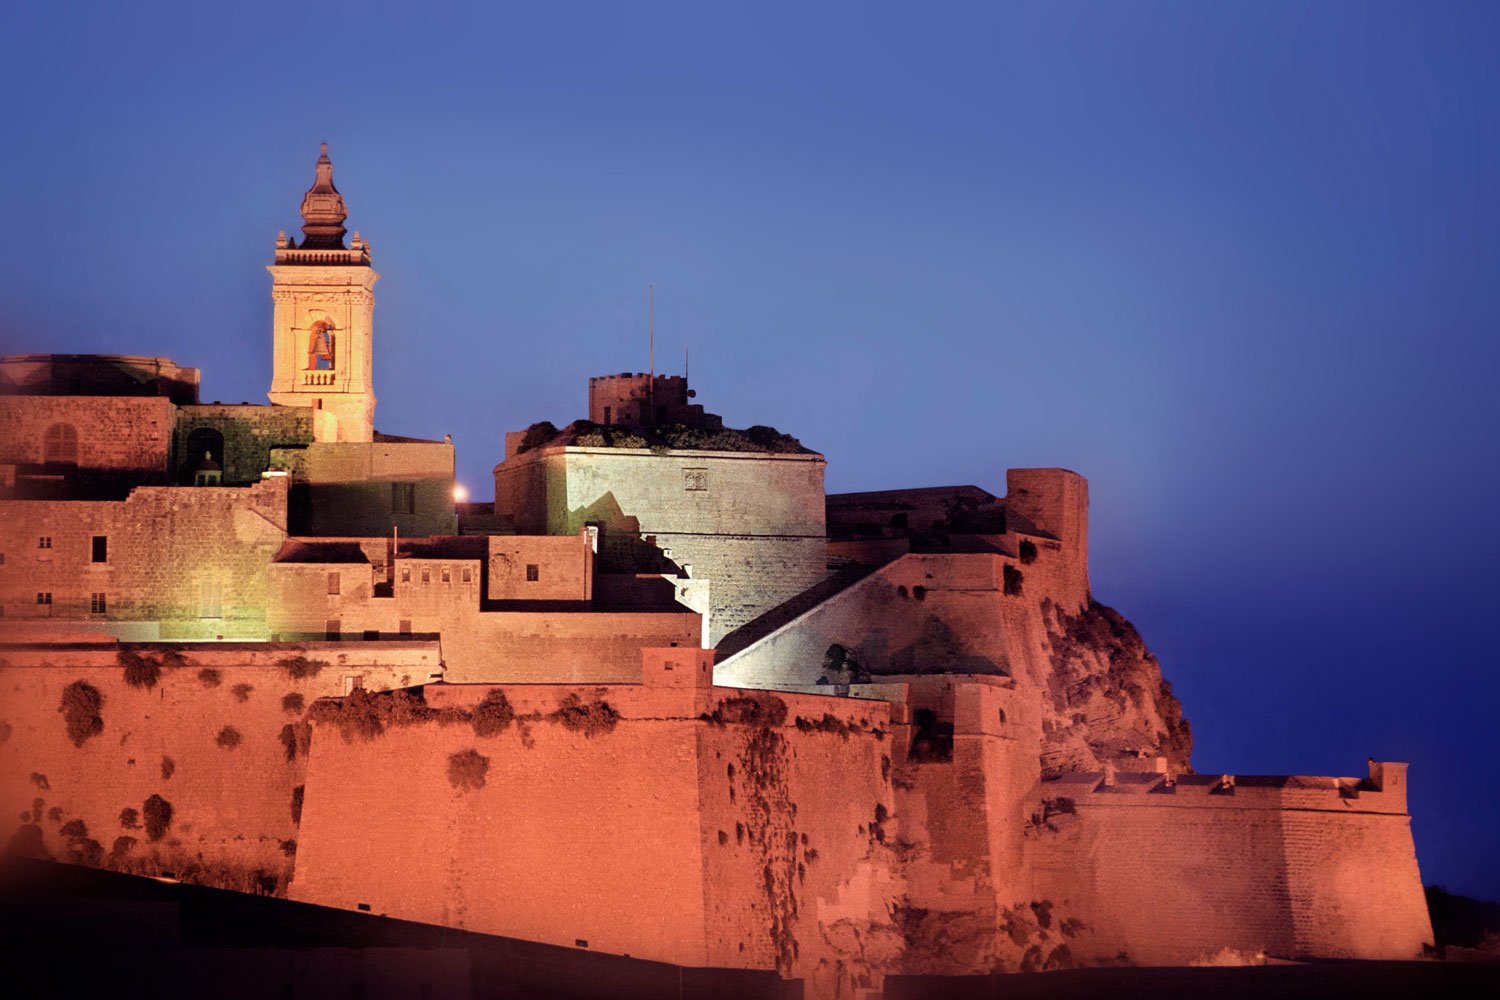 Gozo – Enjoy Malta’s sister island in style with a luxury chauffeur service